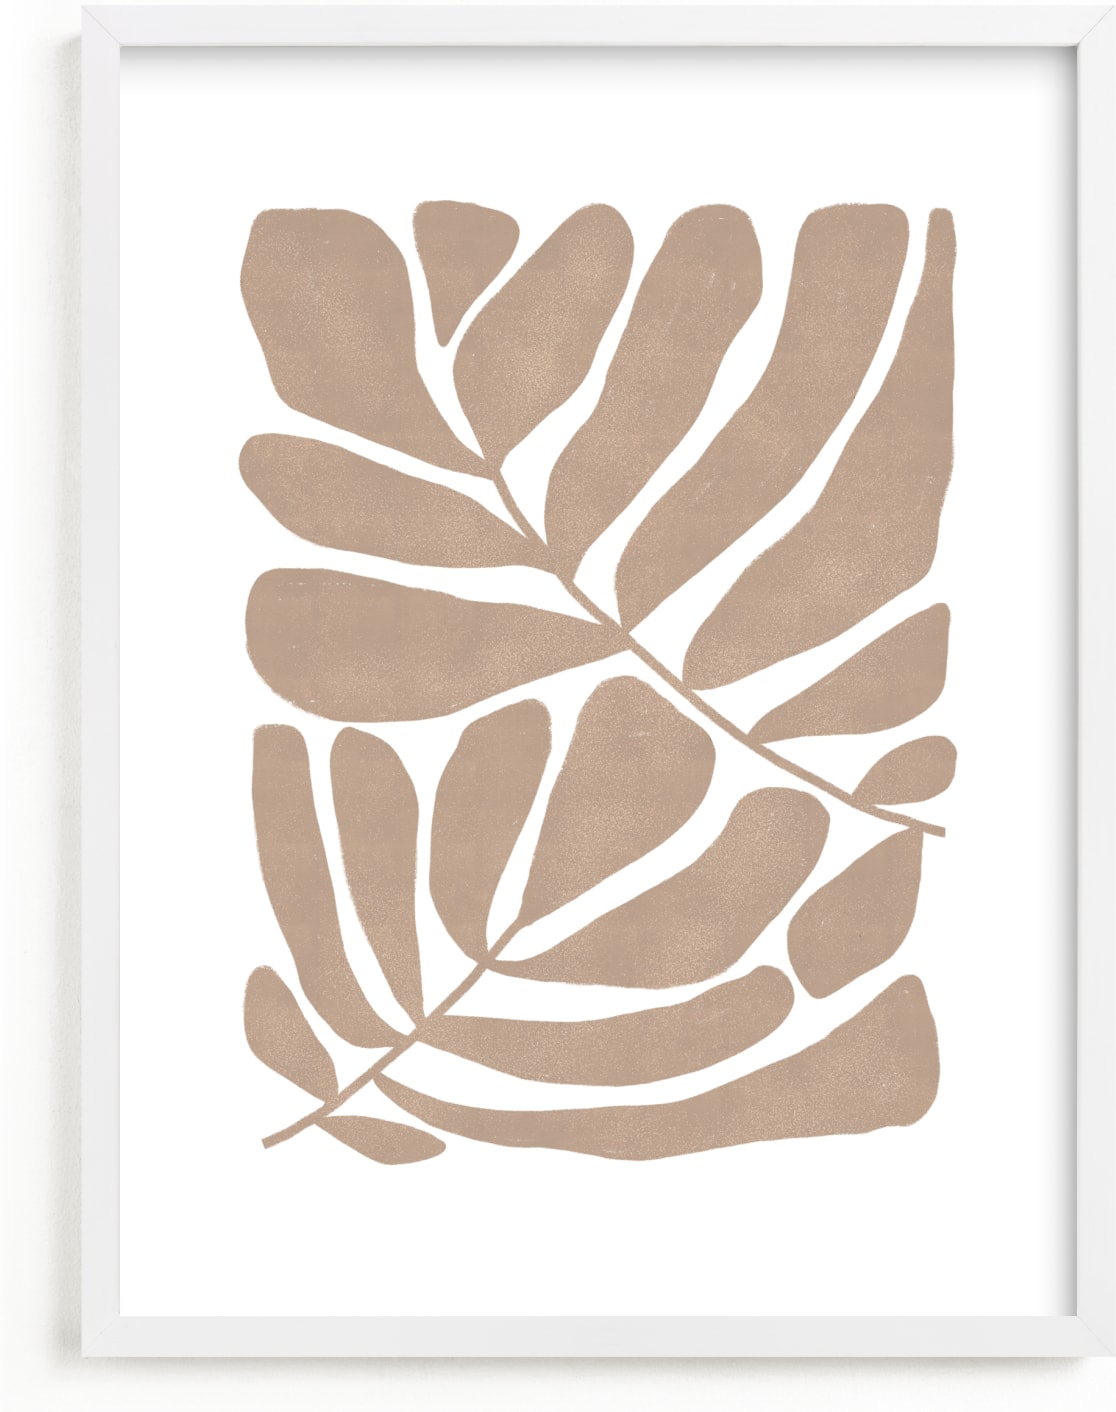 This is a brown art by Kelly Ambrose called Loopy Leaves II.